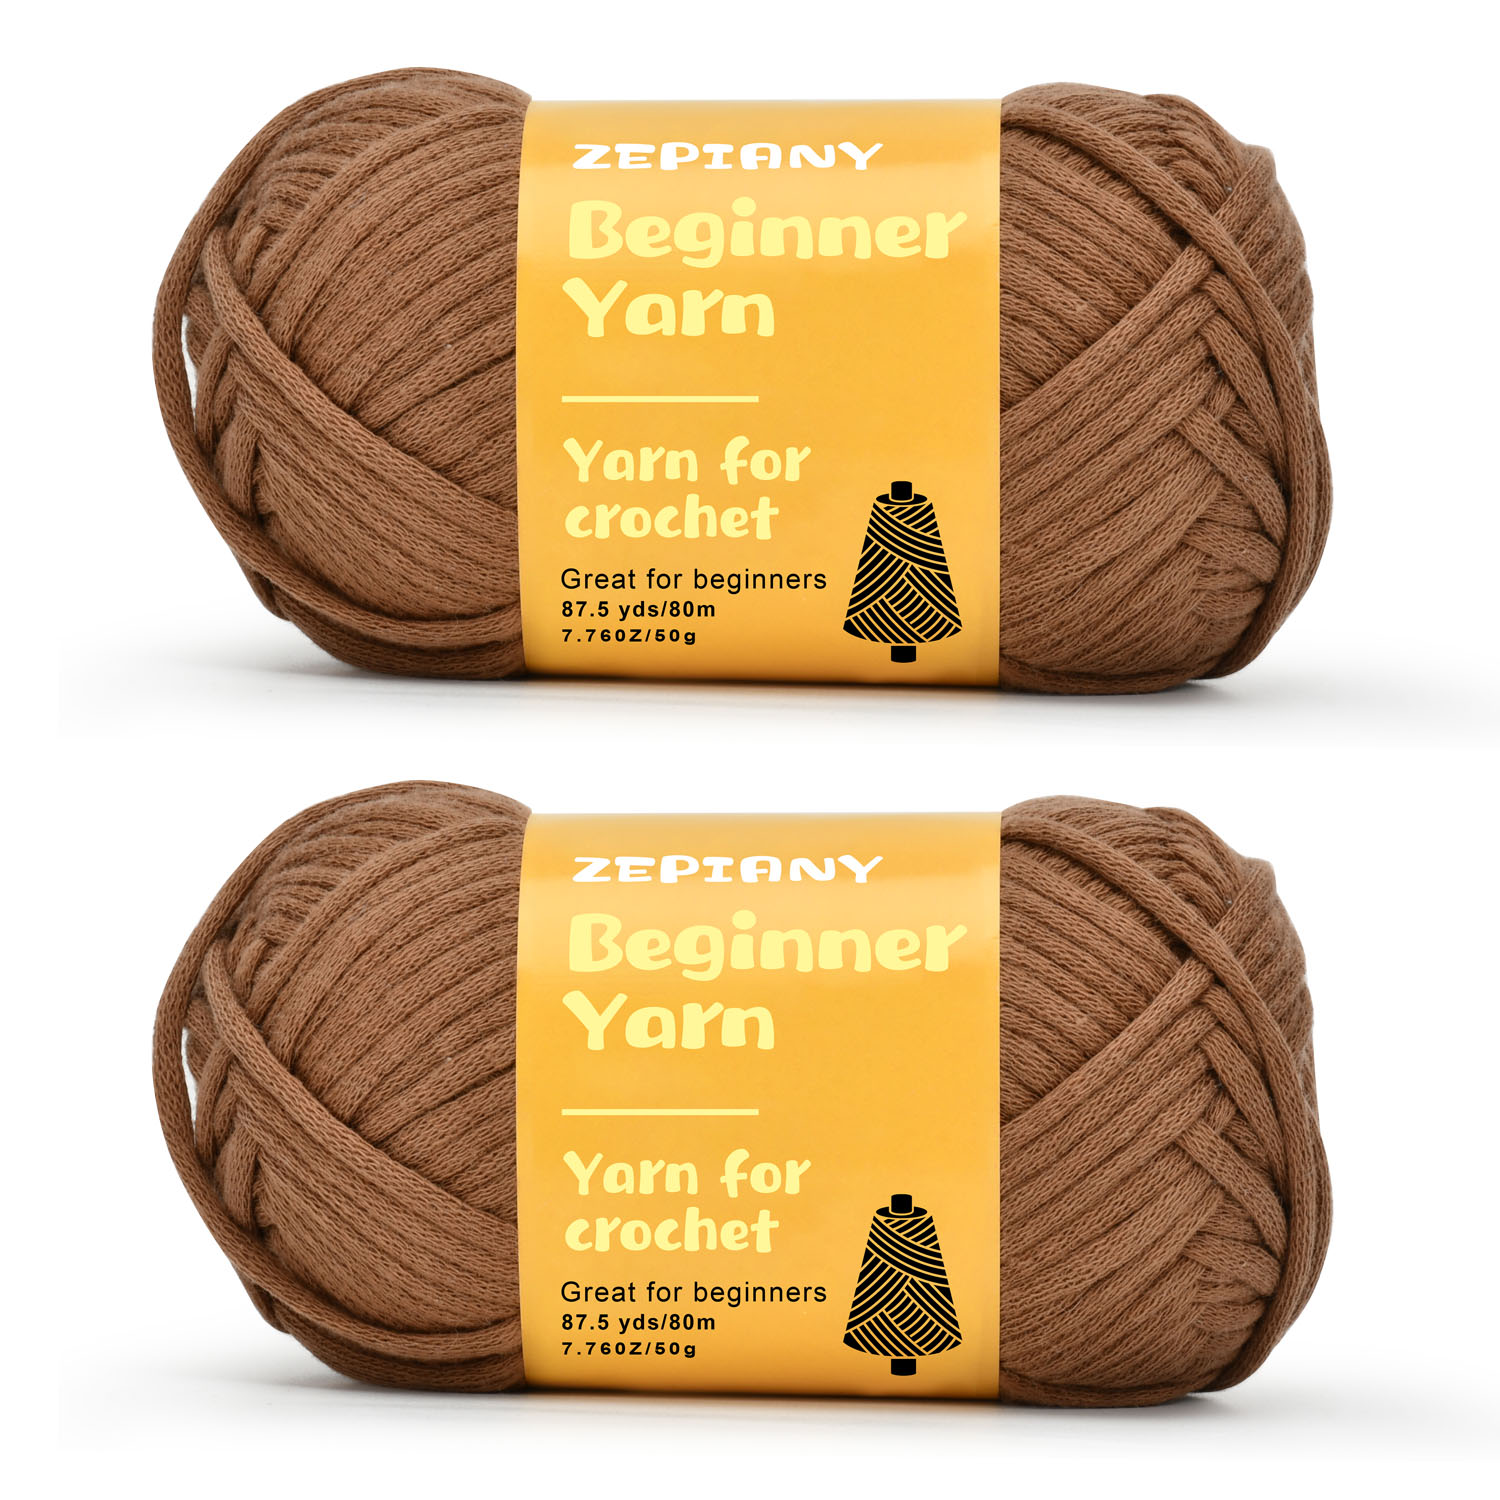  60g Brown Yarn For Crocheting And Knitting;66m (72yds)  Cotton Yarn For Beginners